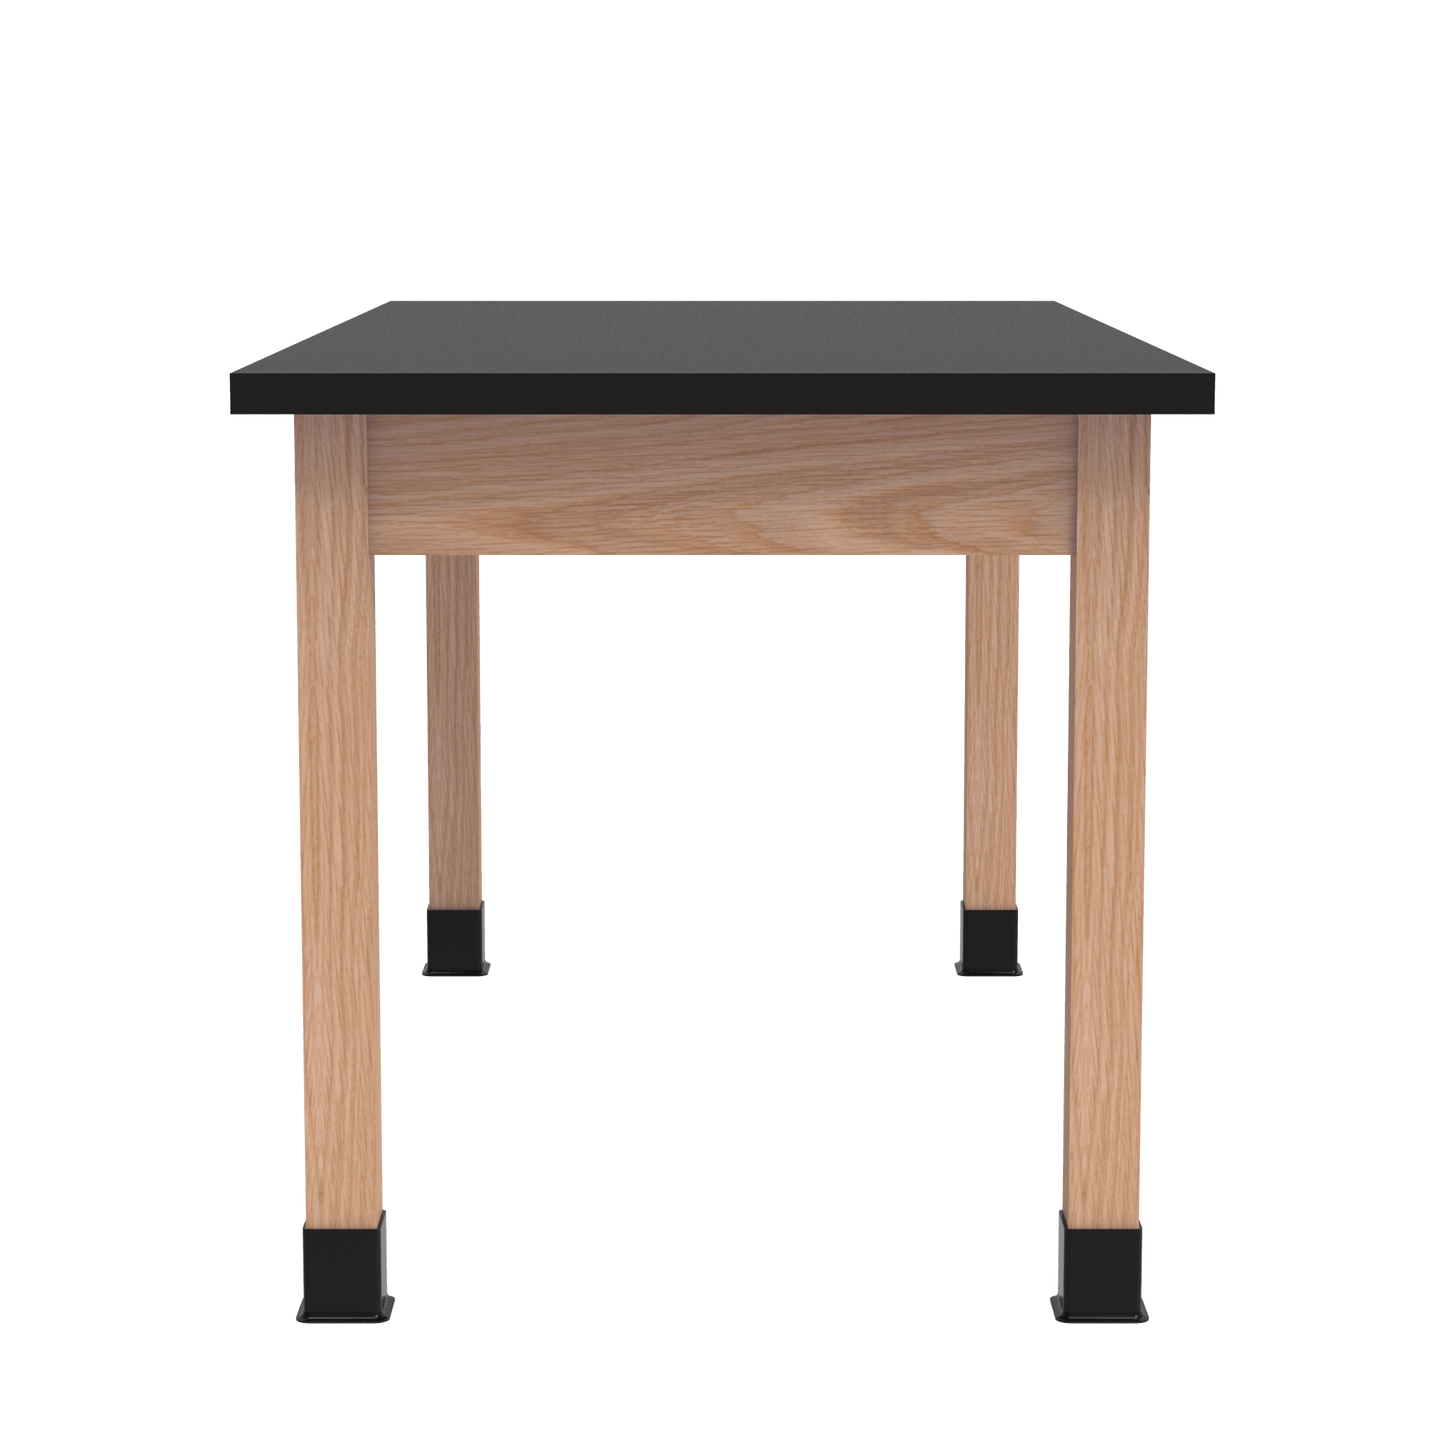 Diversified Woodcrafts Science Table w/ Book Compartment - 54" W x 36" D - Solid Oak Frame and Adjustable Glides - SchoolOutlet